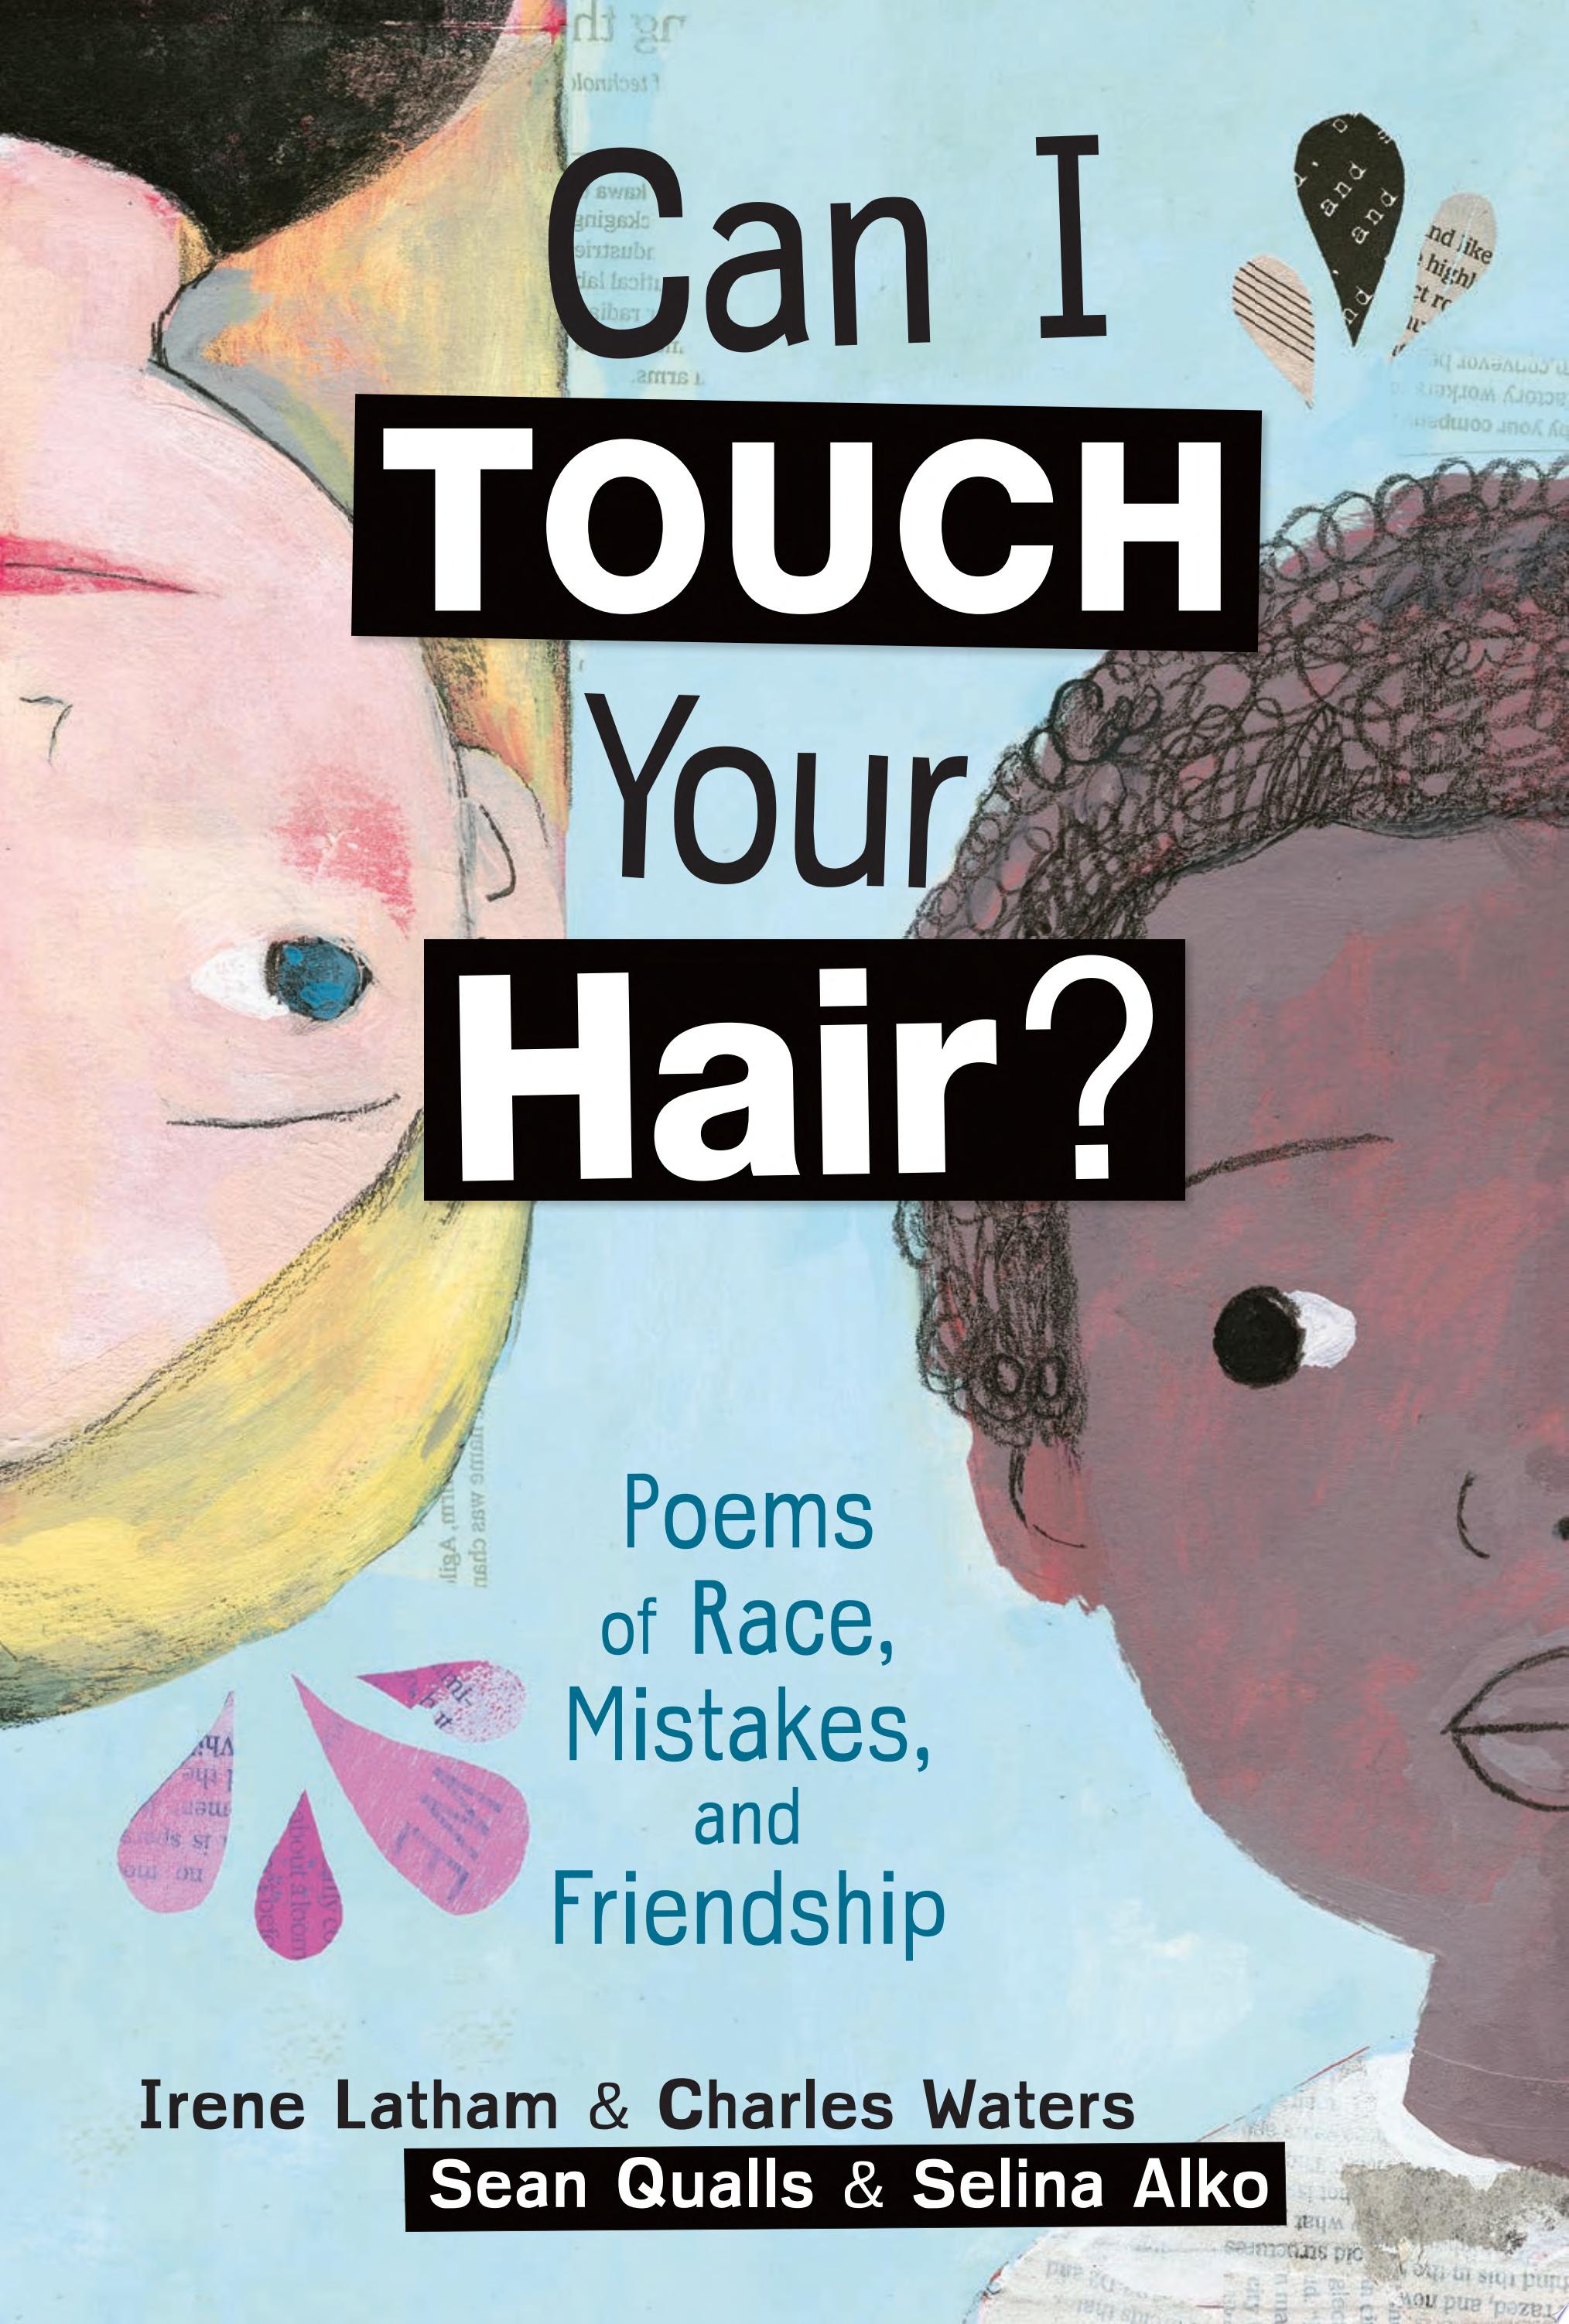 Image for "Can I Touch Your Hair?"